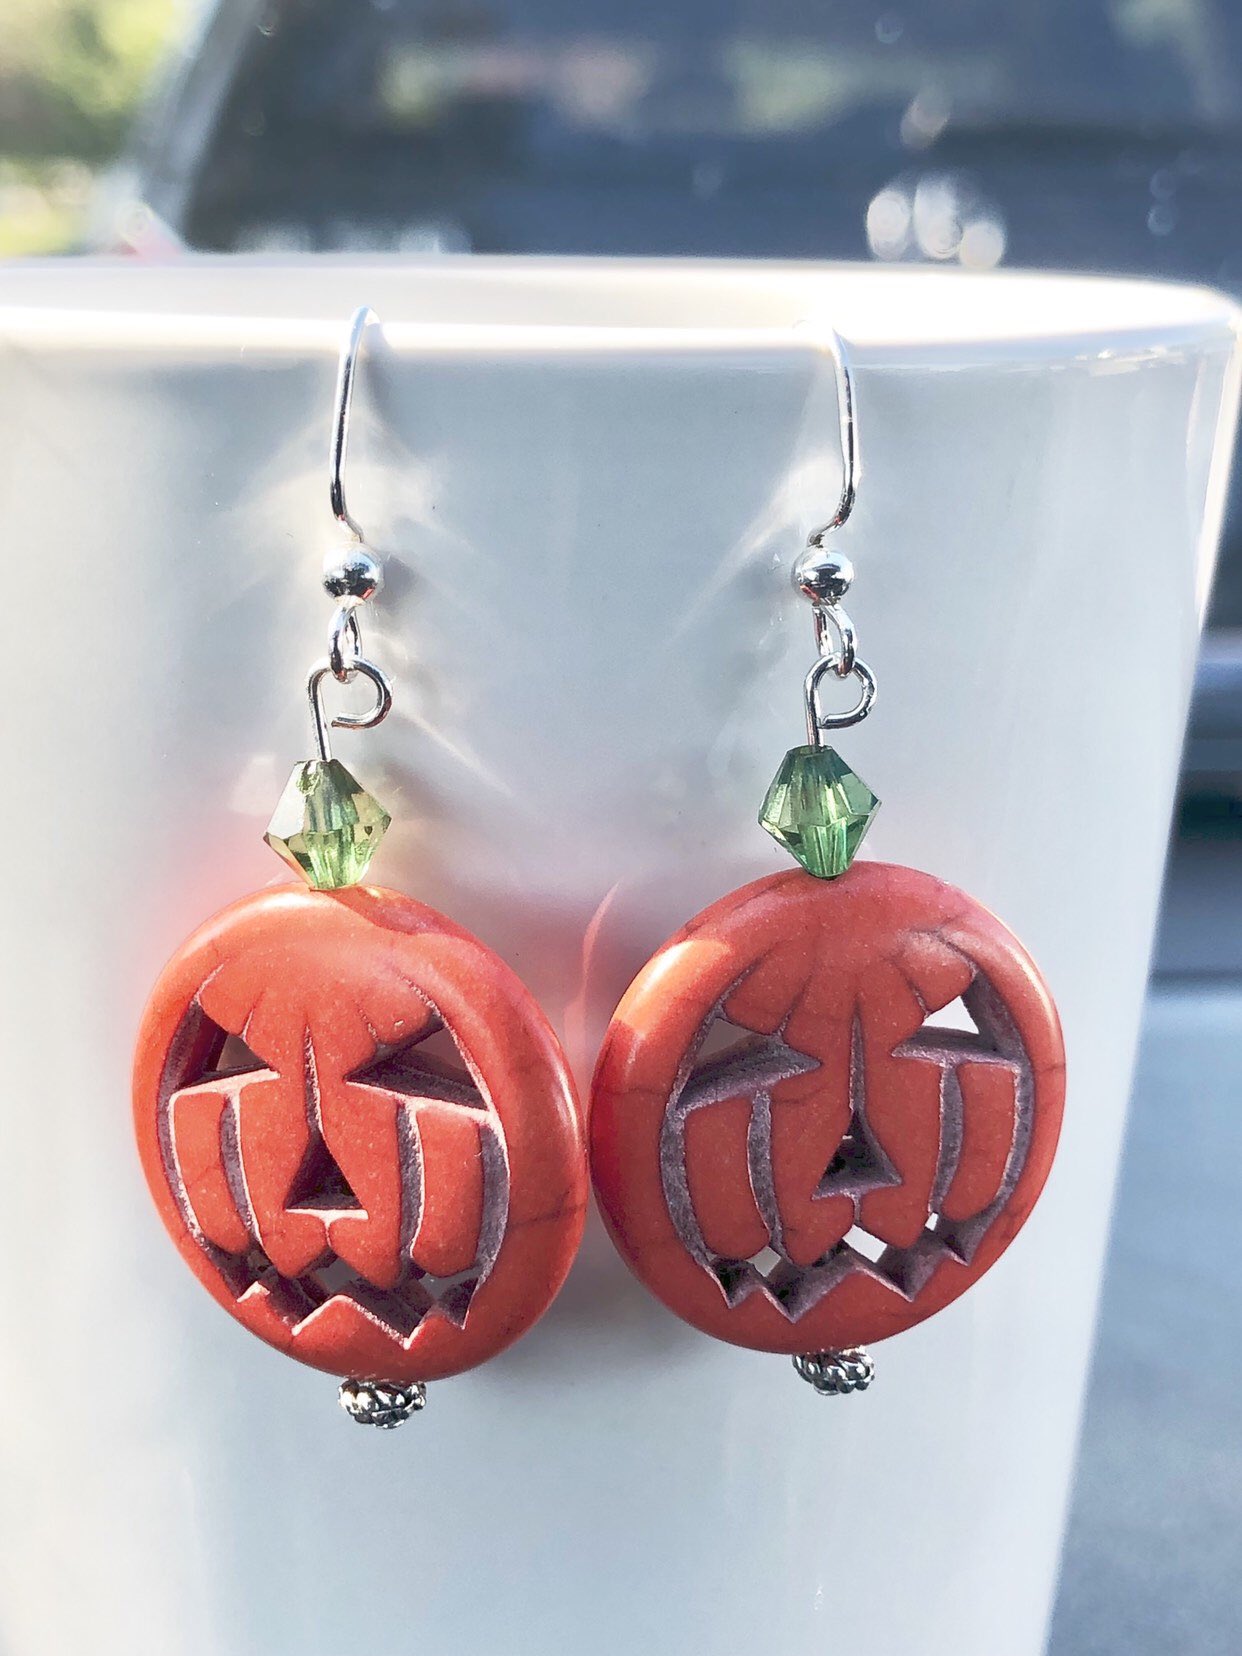 GiftJewelryShop Happy Halloween Jack O Lantern Pumpkin with God All Things are Possible Religious Dangle Charm Bracelets